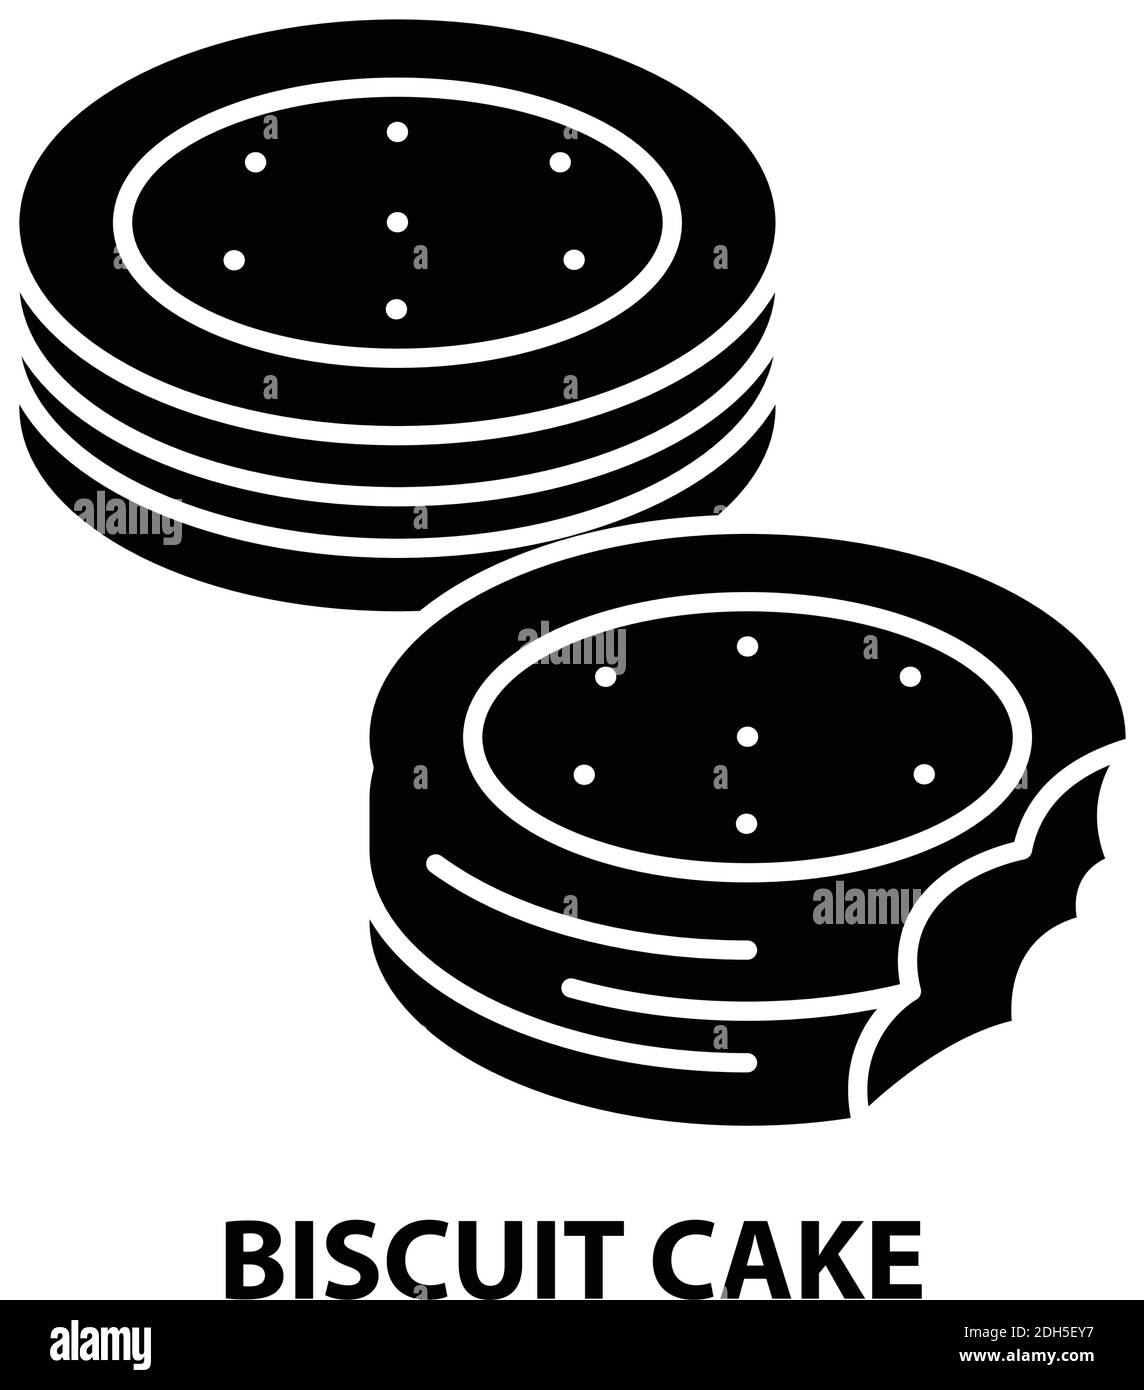 biscuit cake icon, black vector sign with editable strokes, concept illustration Stock Vector